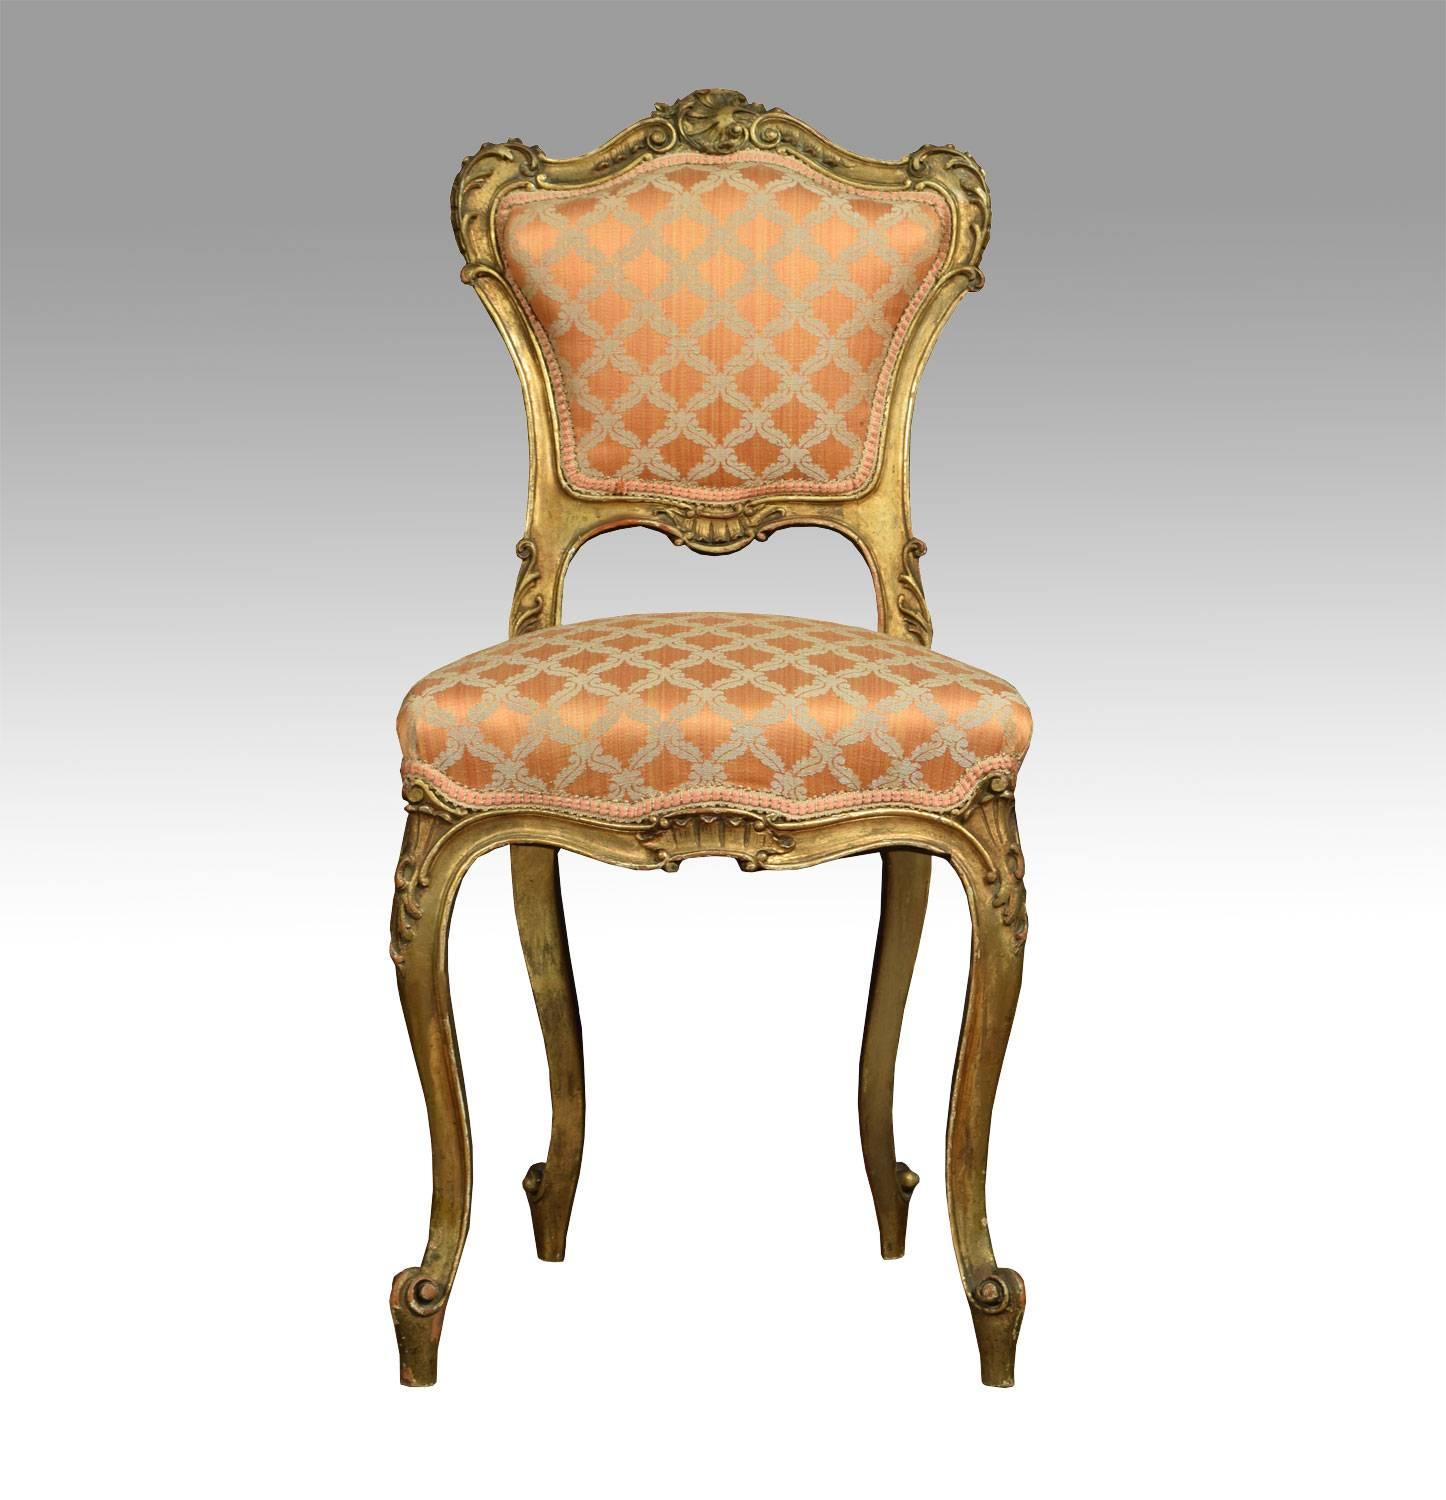 Pair of Louis XVL style giltwood side chairs with a shell crest and leaf swept scrolling frame, the padded back above serpentine stuff over seat, all raised up on curvilinear front legs terminating in scroll toes.

Dimensions:

Height 35 inches.